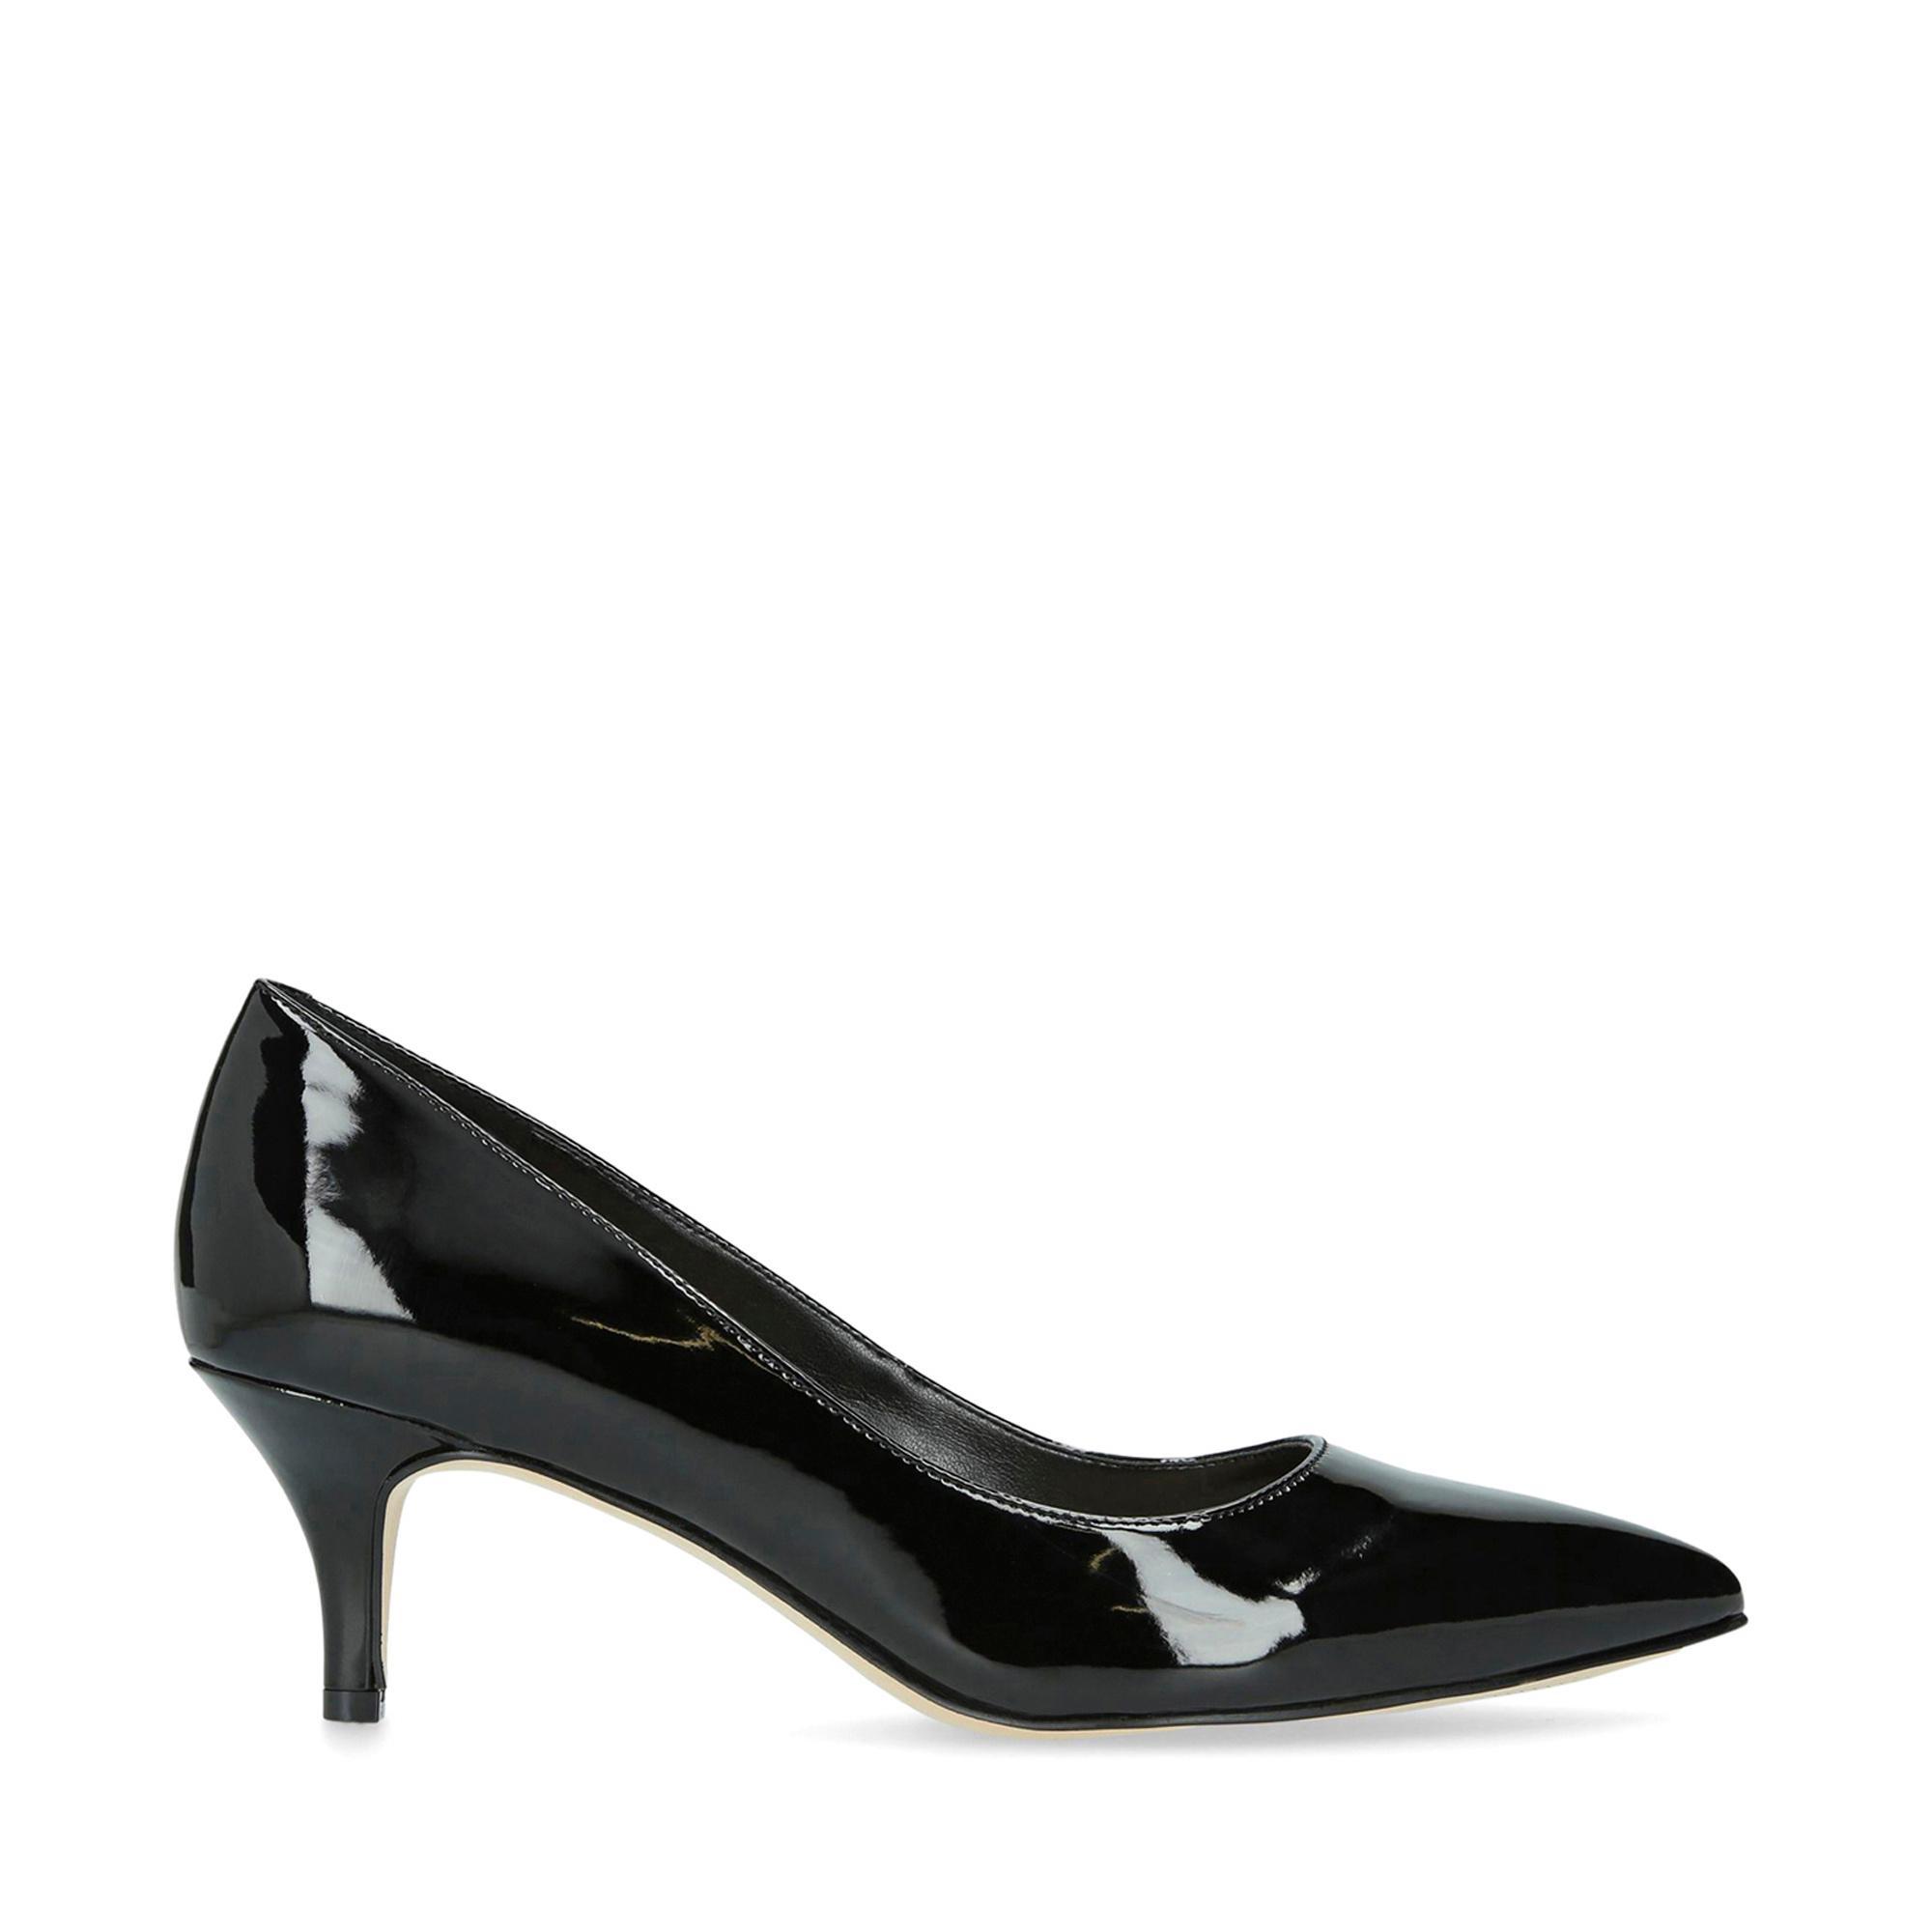 Nine West 'flagship 55' Patent Court Shoes in Black - Lyst